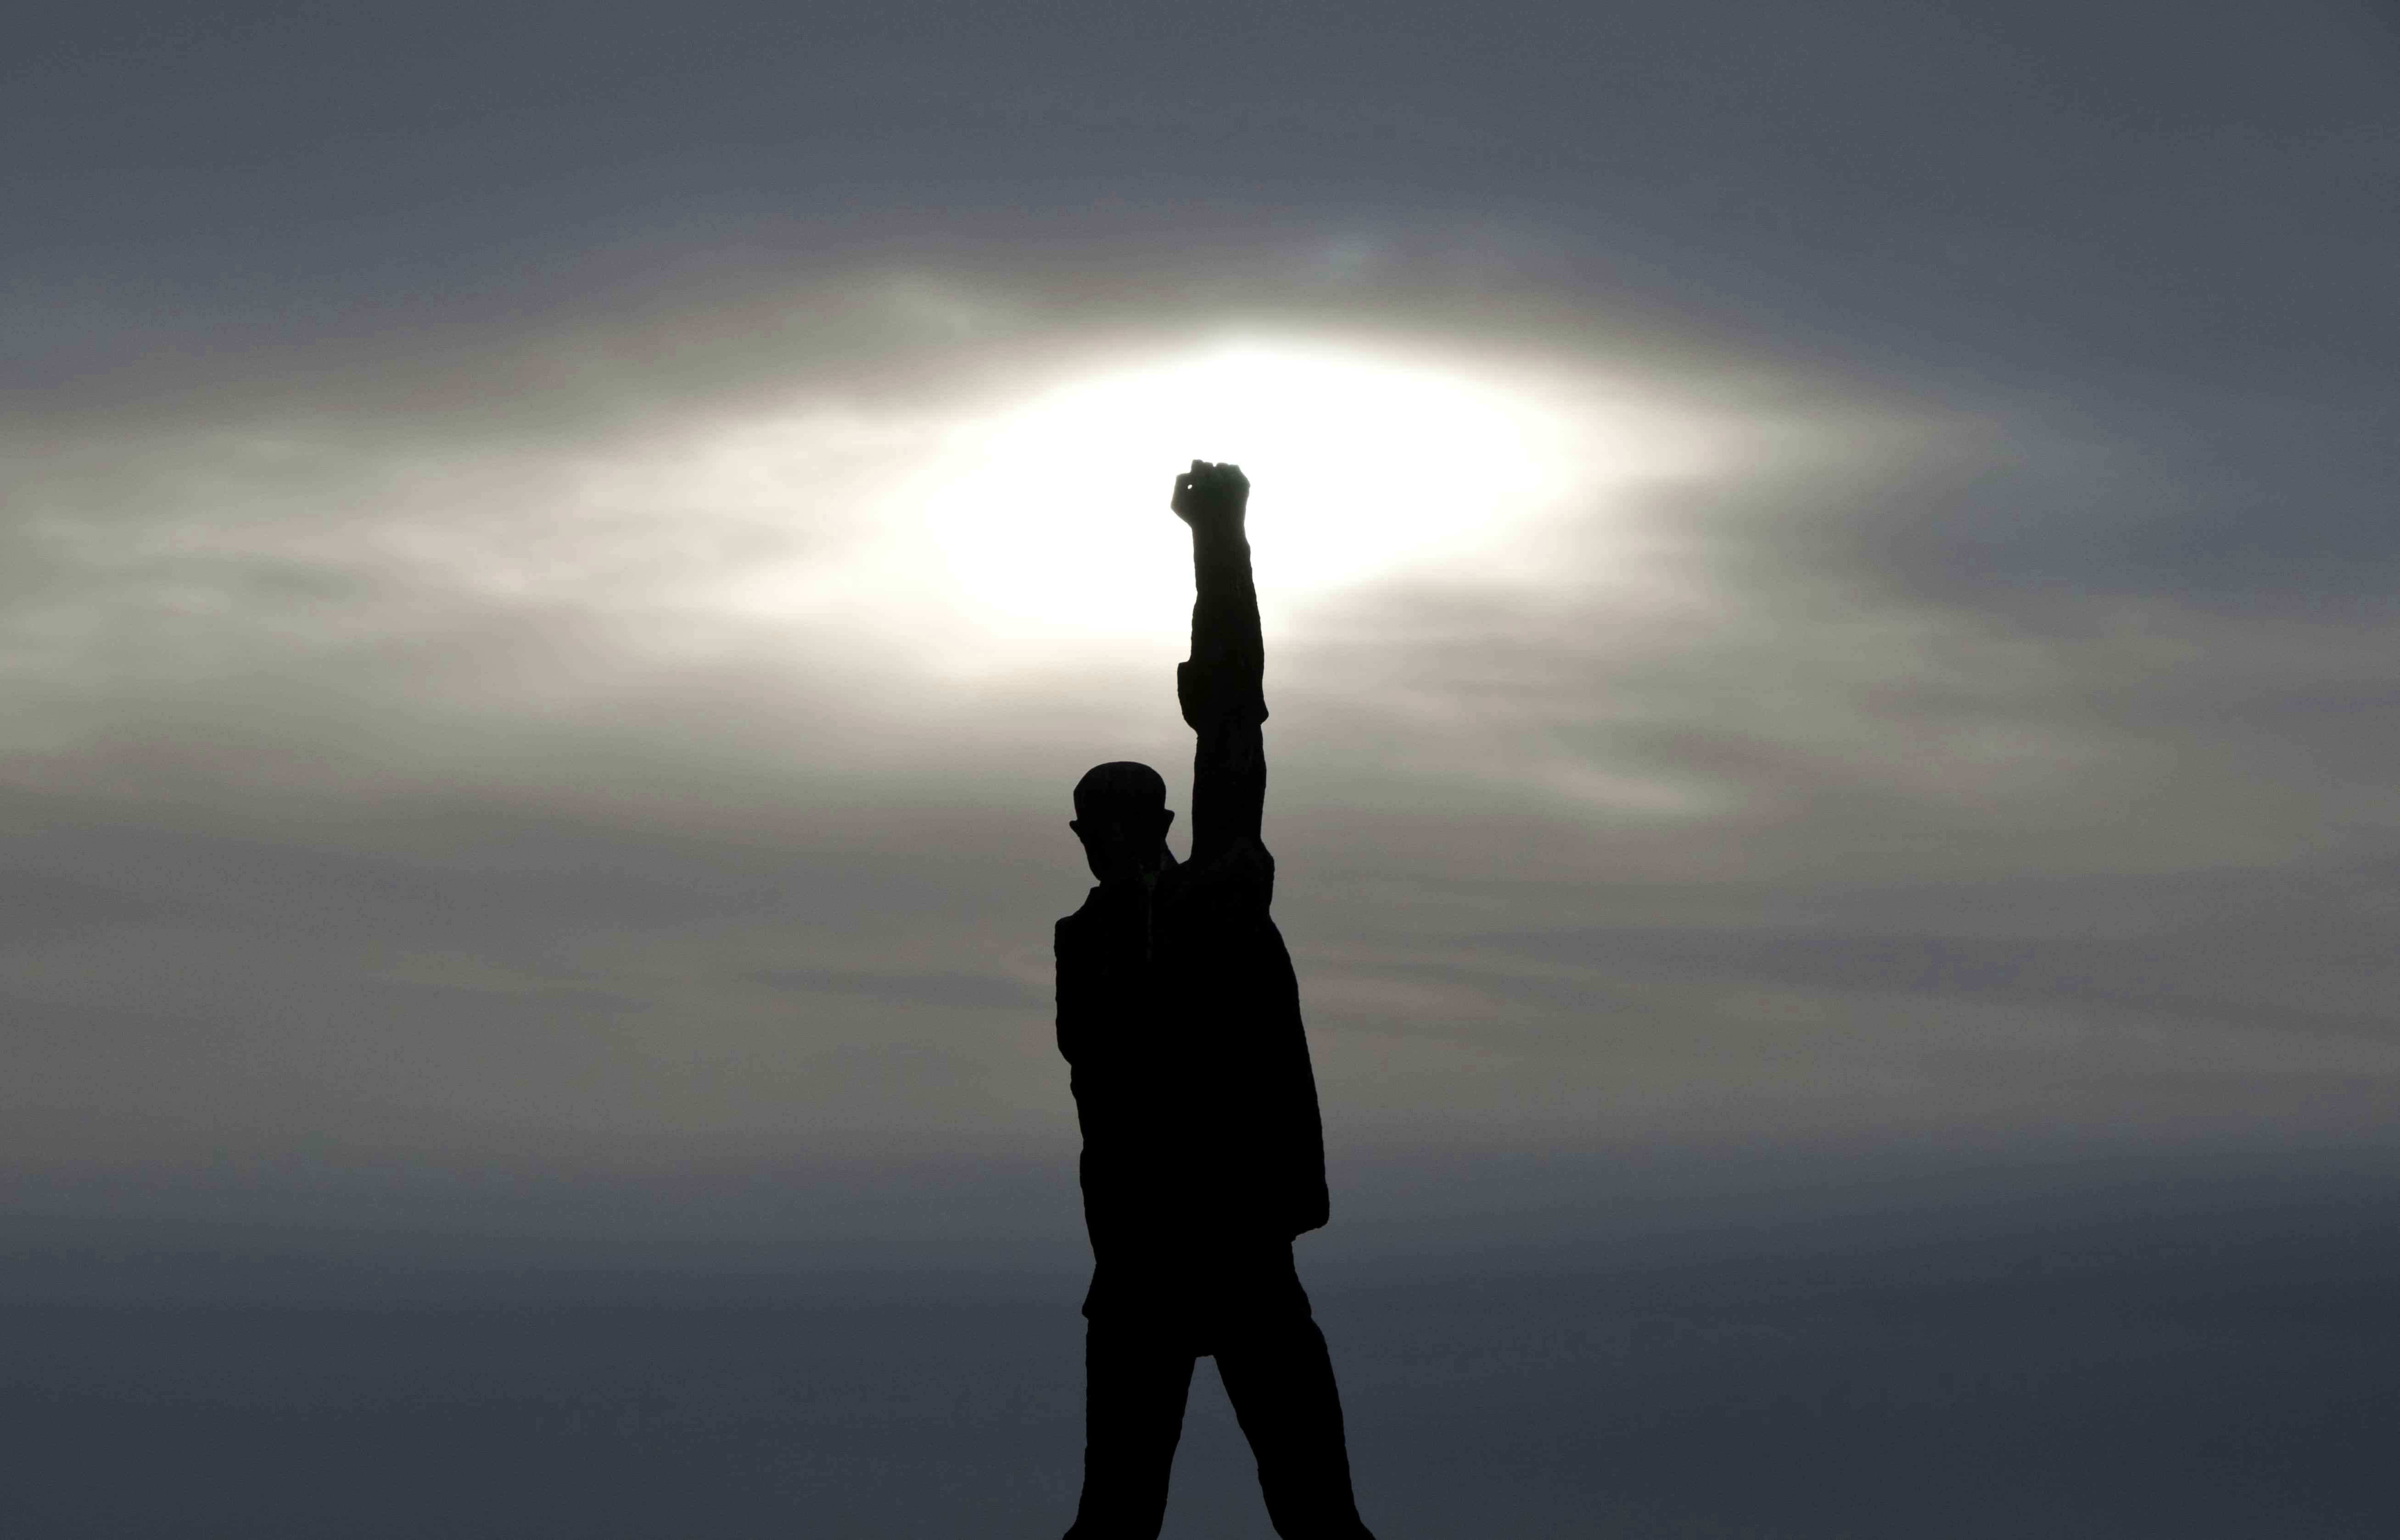 Man Triumphantly Holding a Fist in the Air